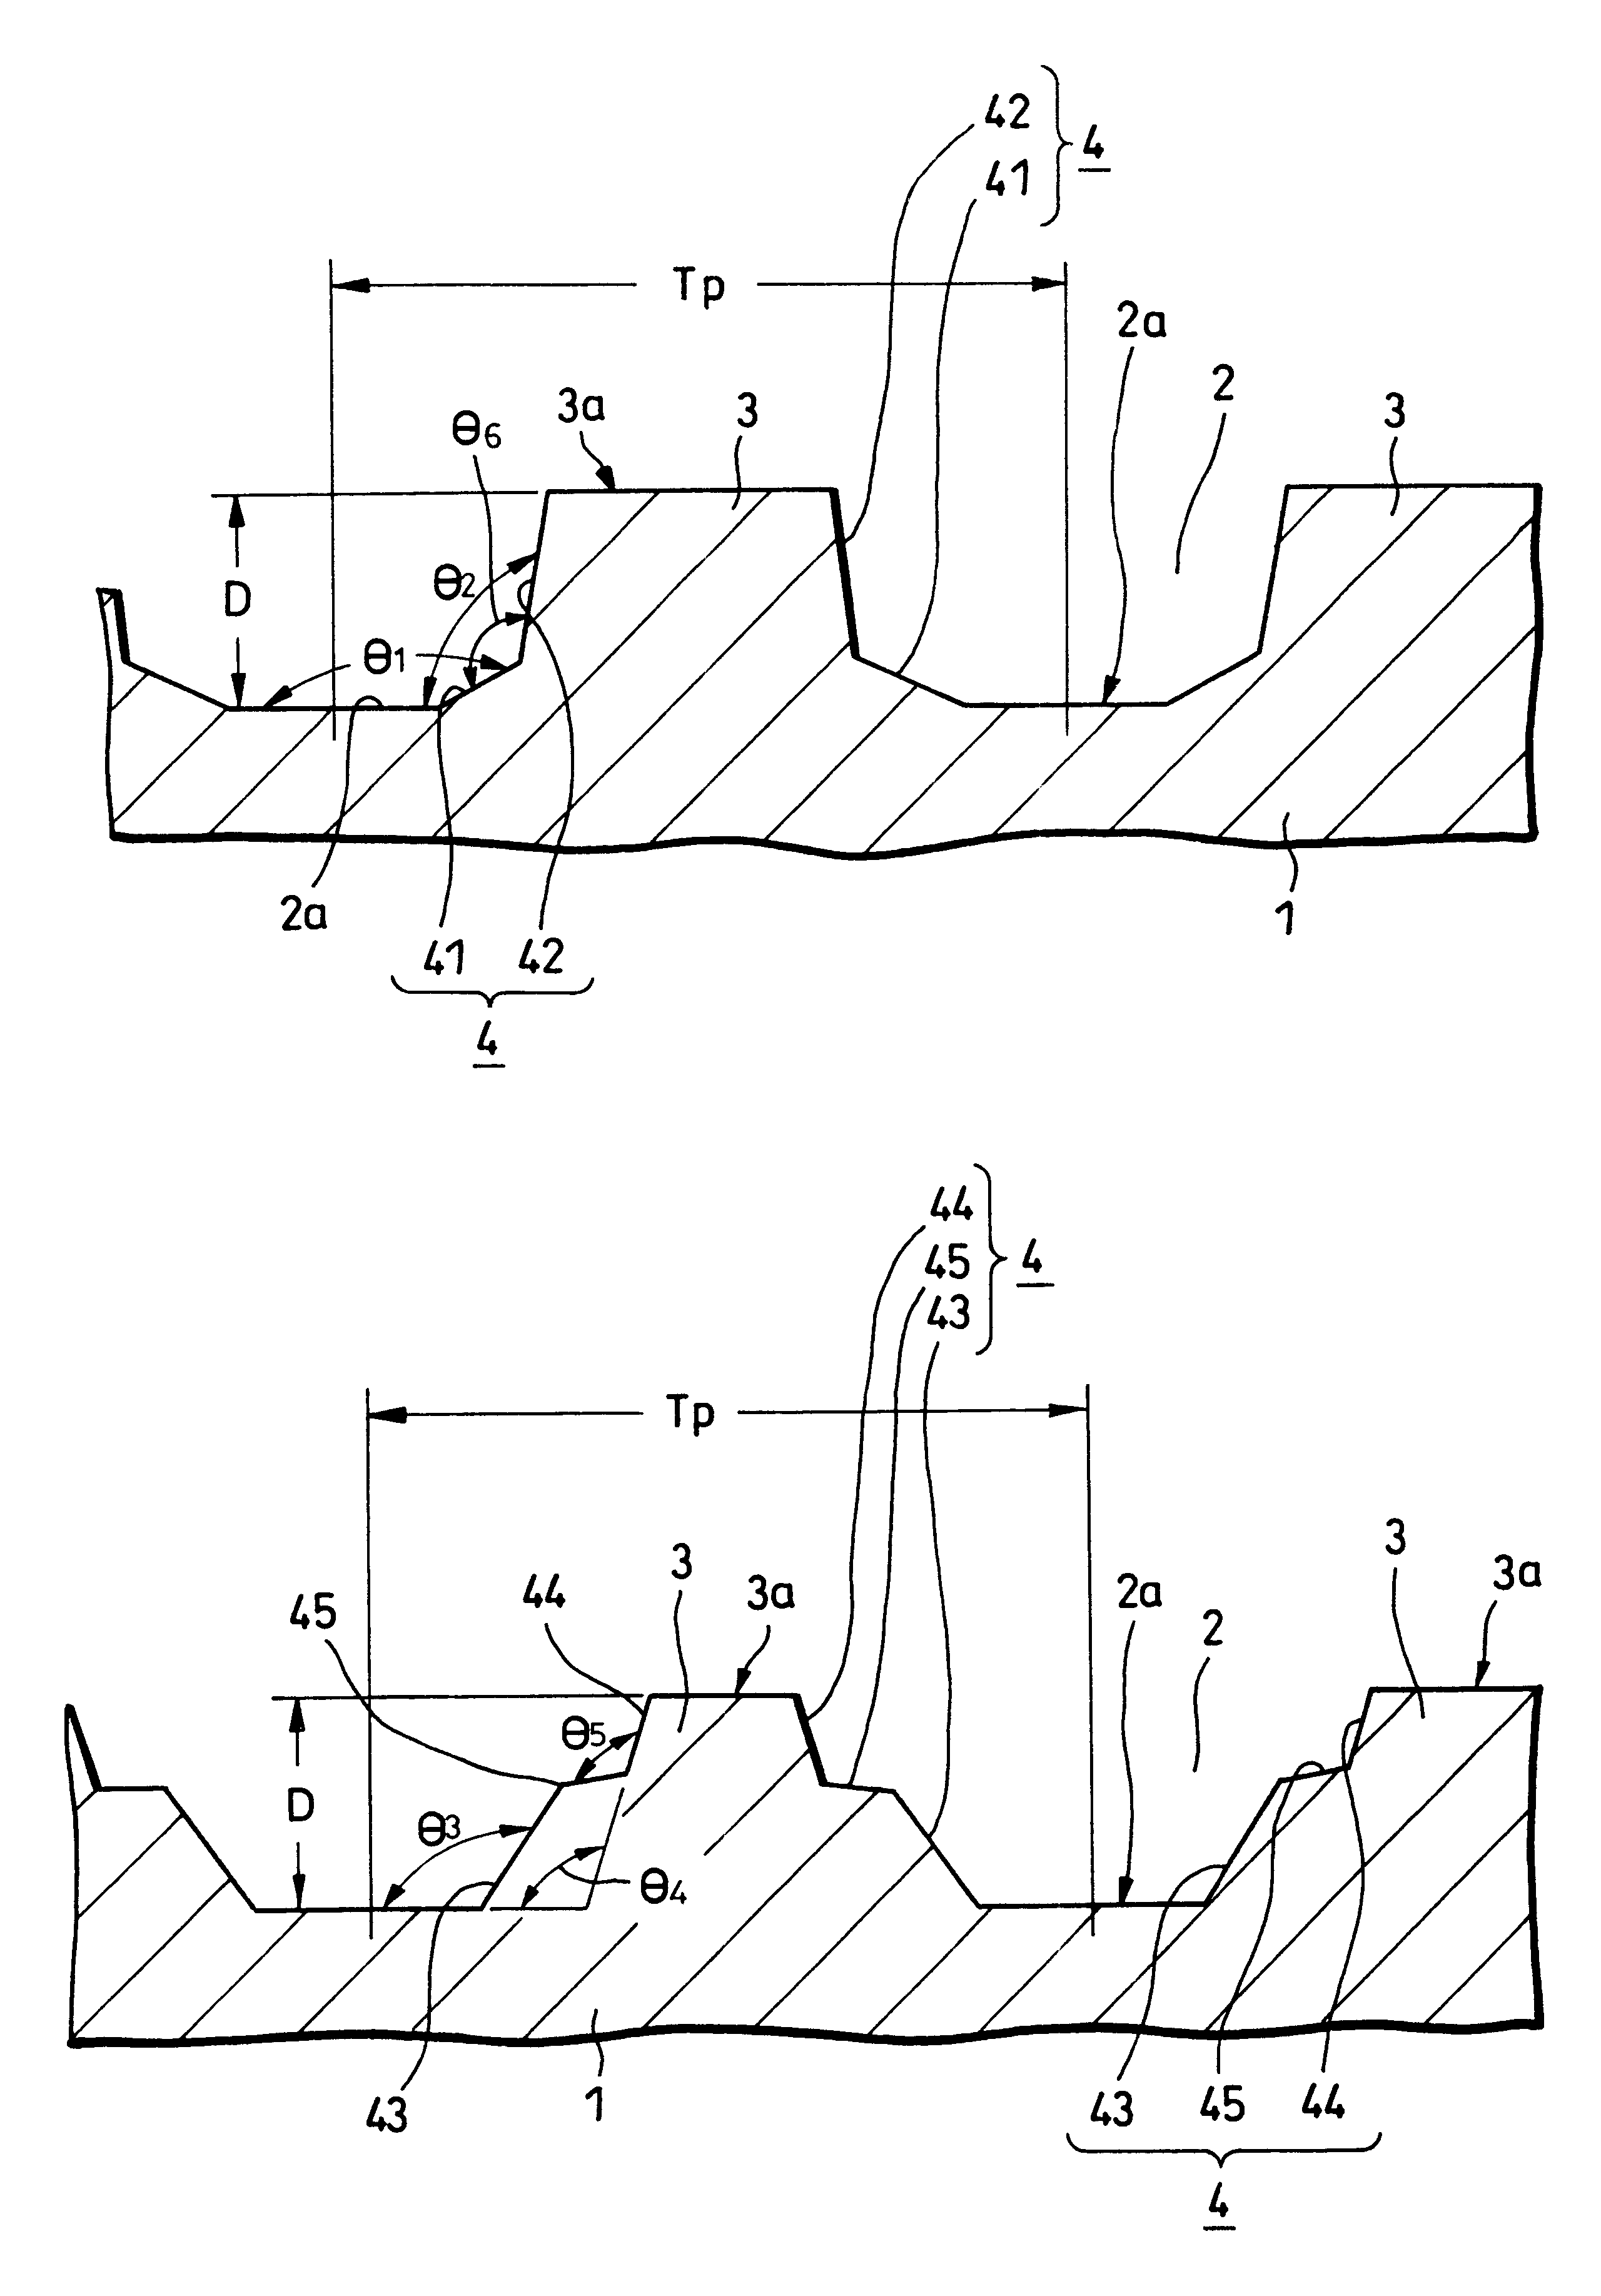 Substrate for optical recording media, optical recording medium, manufacturing process for optical recording media, and optical recording/reproducing method